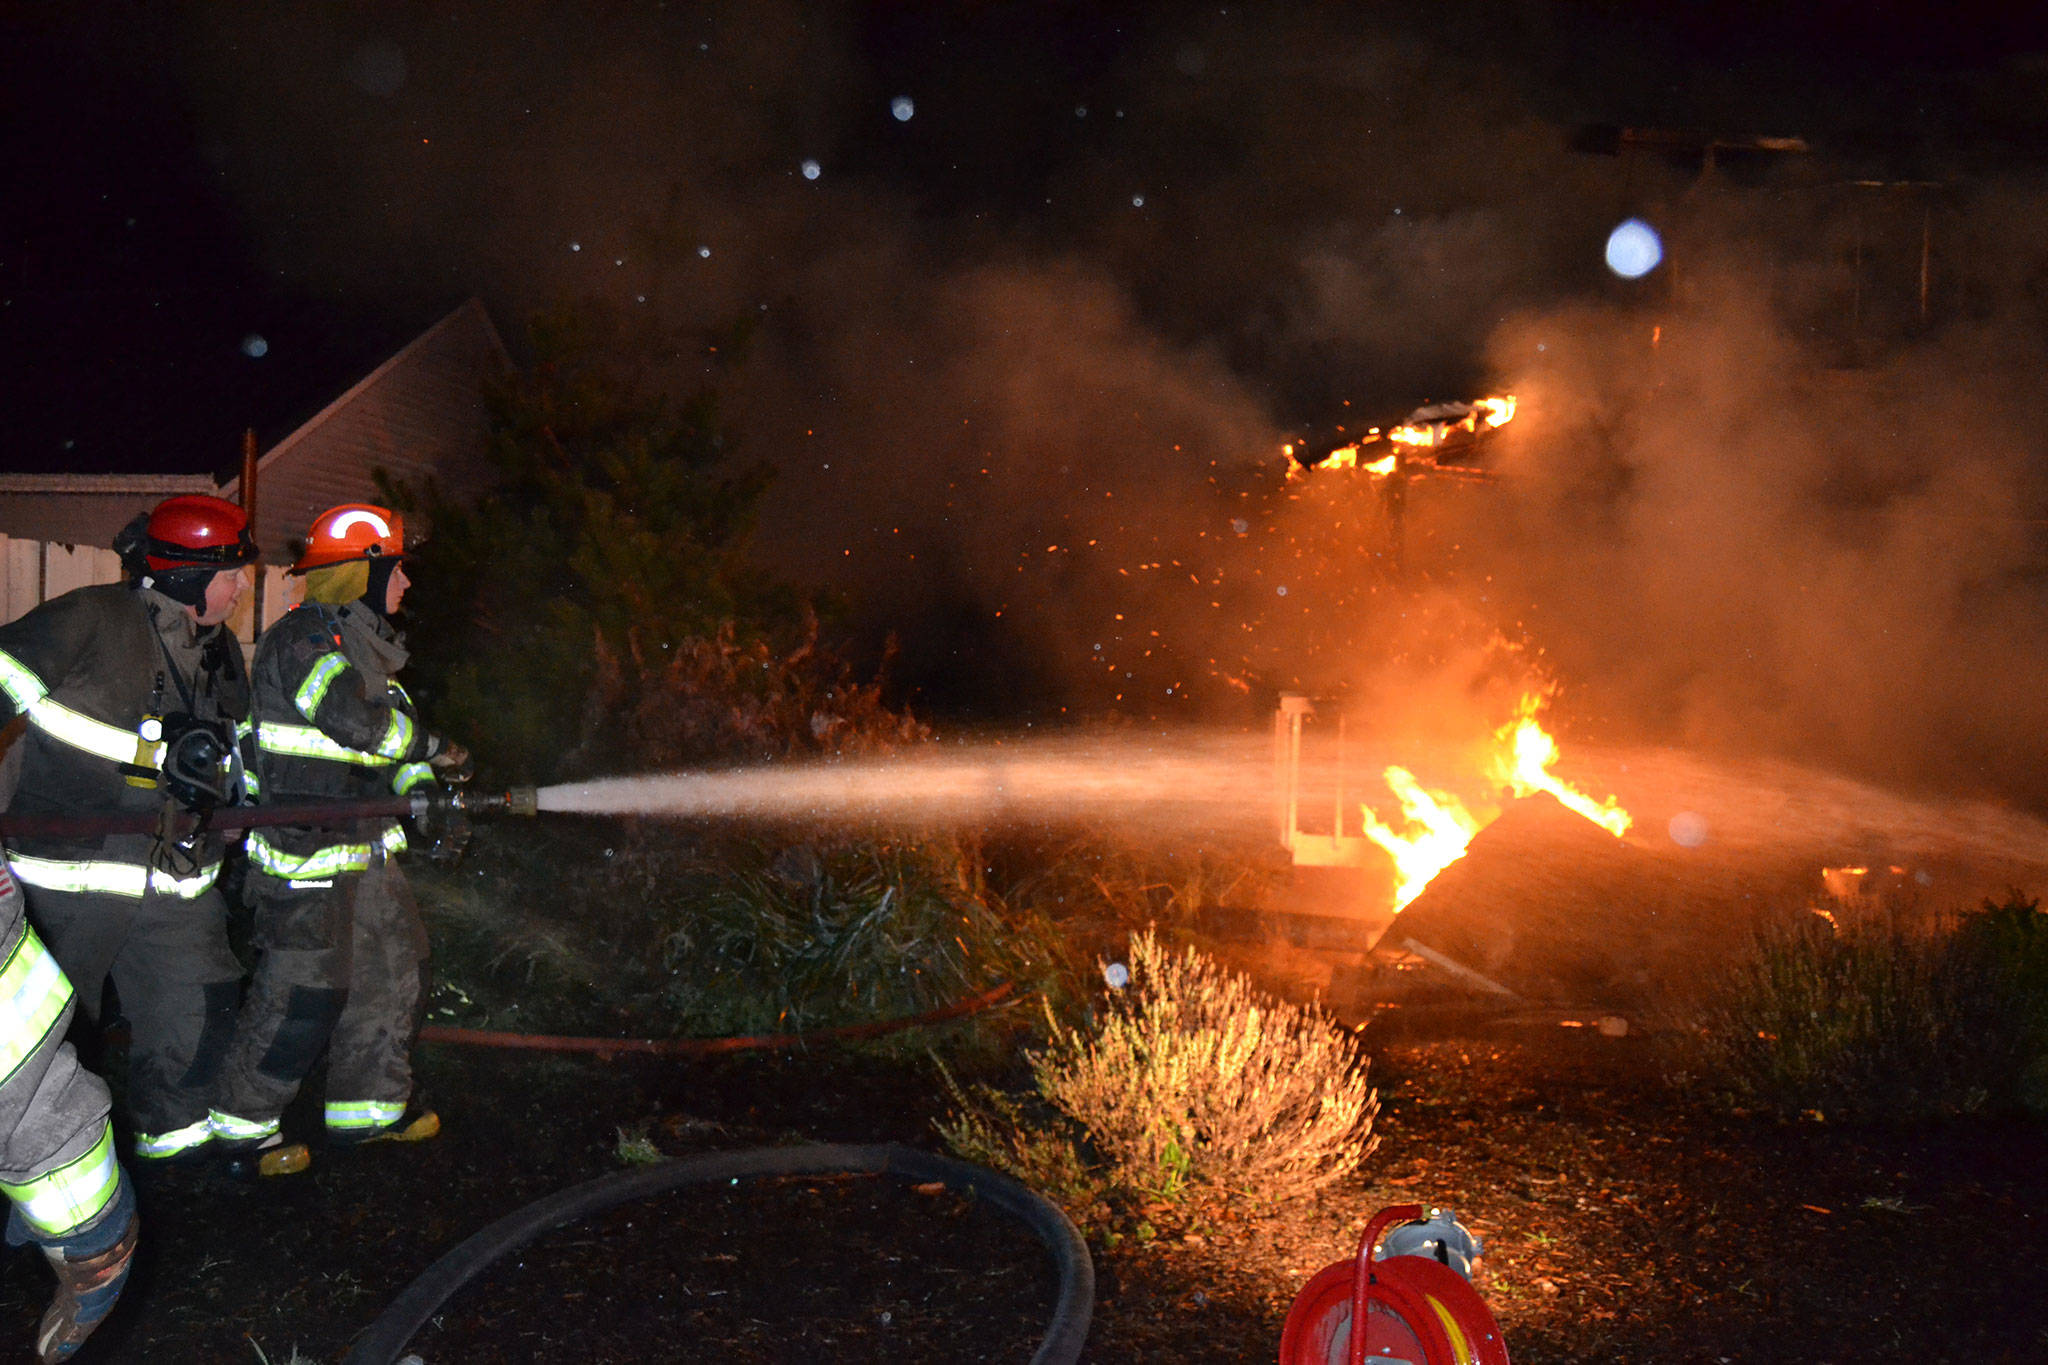 Captain Chris Turner with Clallam County Fire District 3 helps his son Tyler, an Explorer Scout with Post 1003, fight a house fire on Dec. 18 on 3 Crabs Road. Firefighters reported to the scene around 8:30 p.m. and extinguished it around midnight. Sequim Gazette photo by Matthew Nash